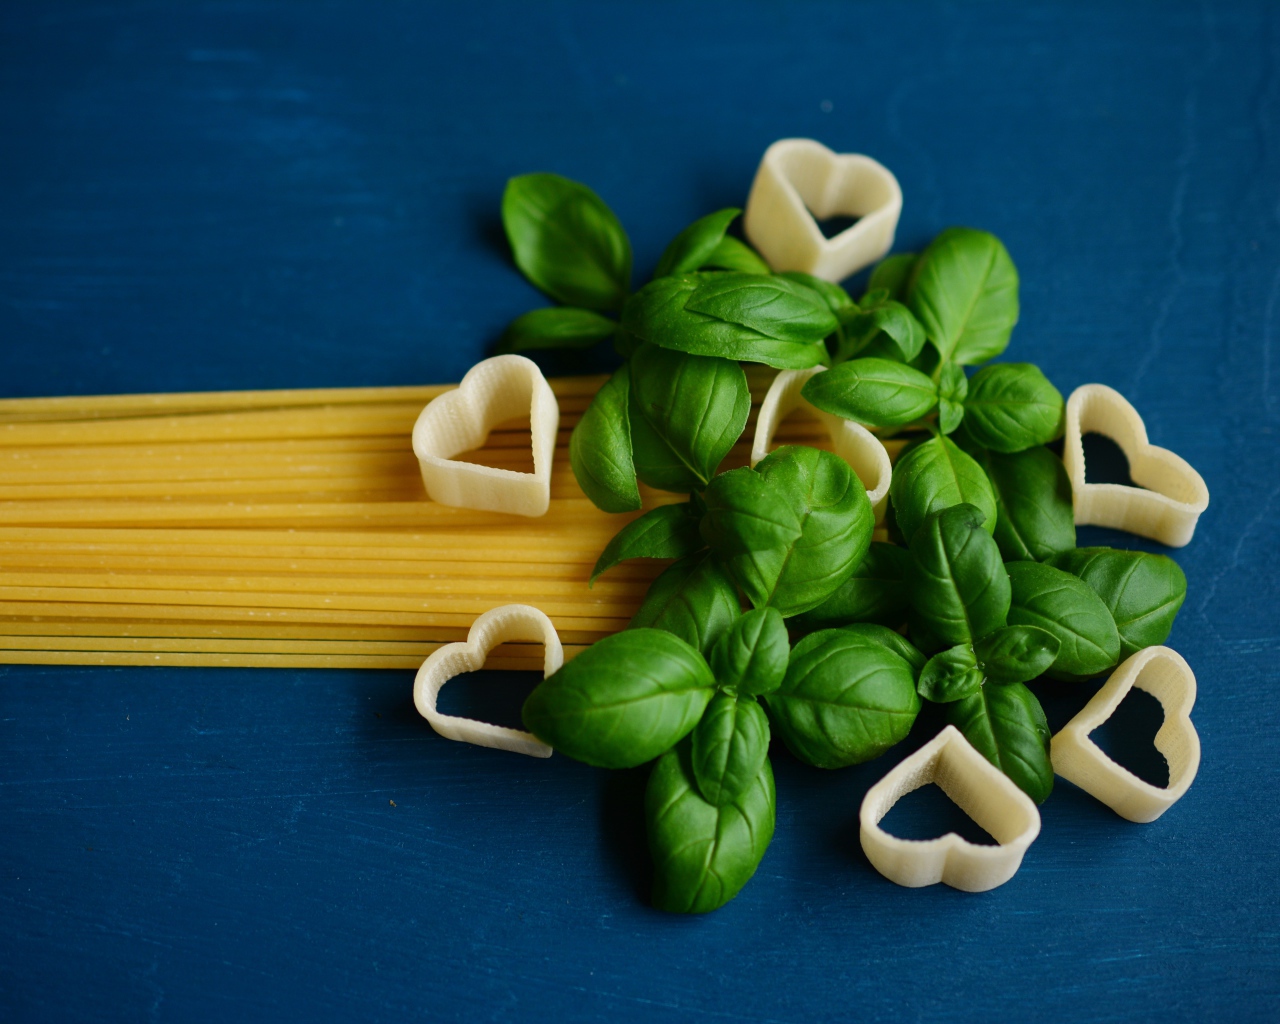 Spaghetti with basil on a blue background